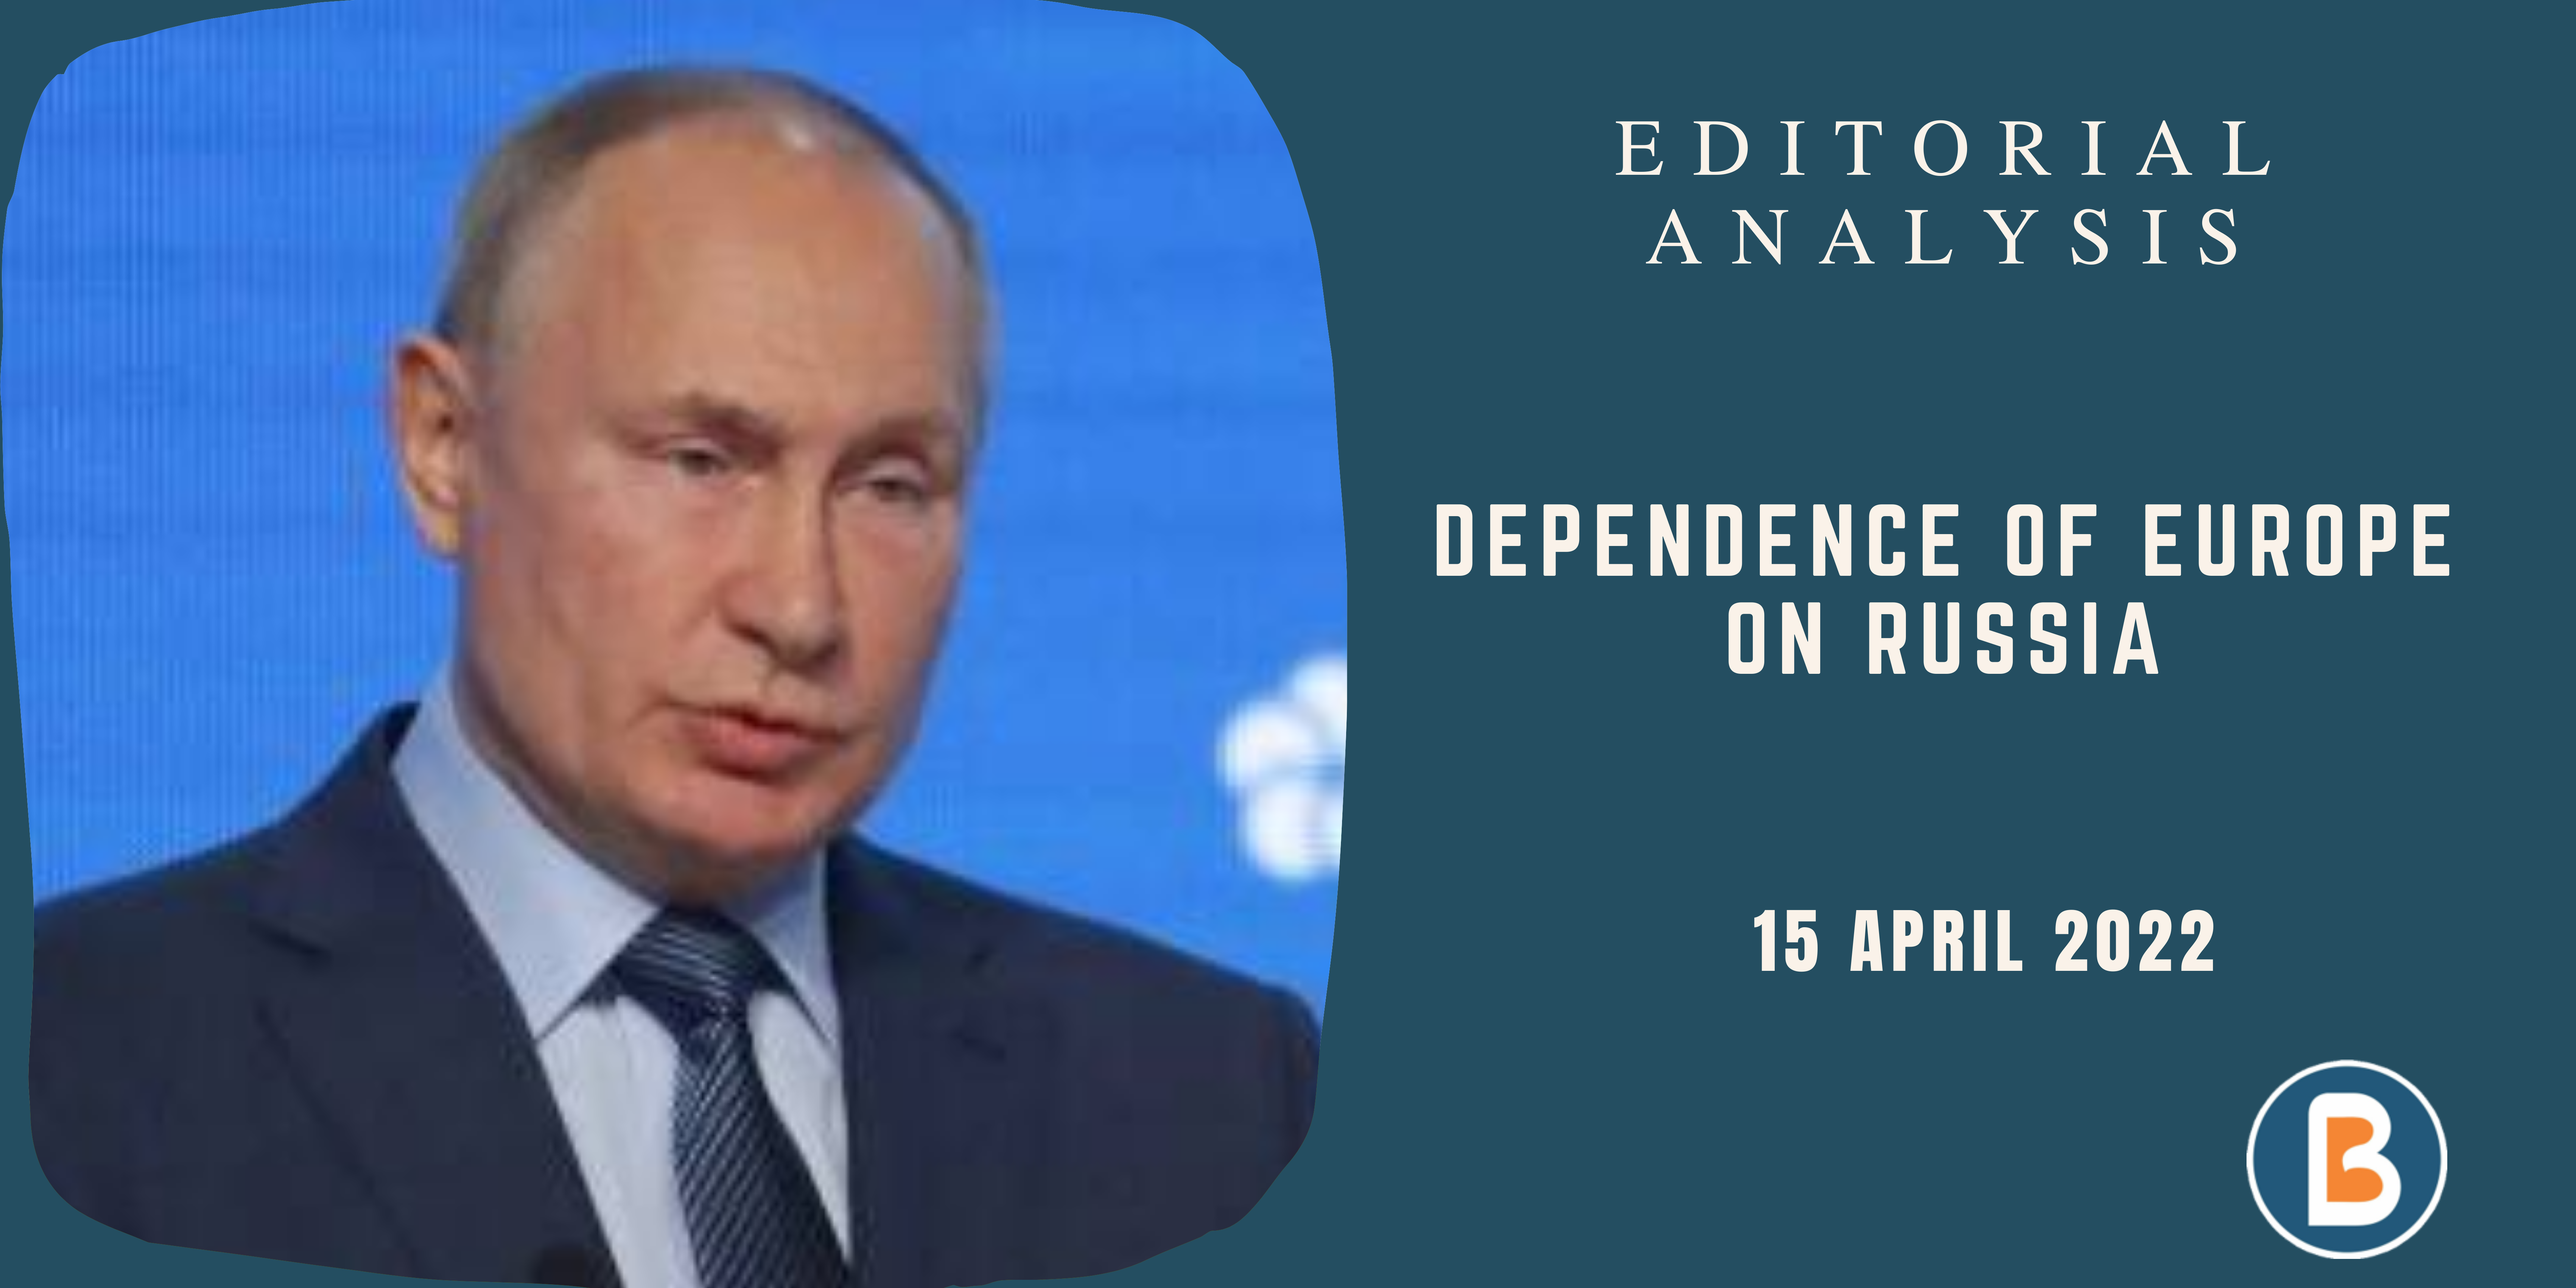 Editorial Analysis for IAS - Dependence of Europe on Russia